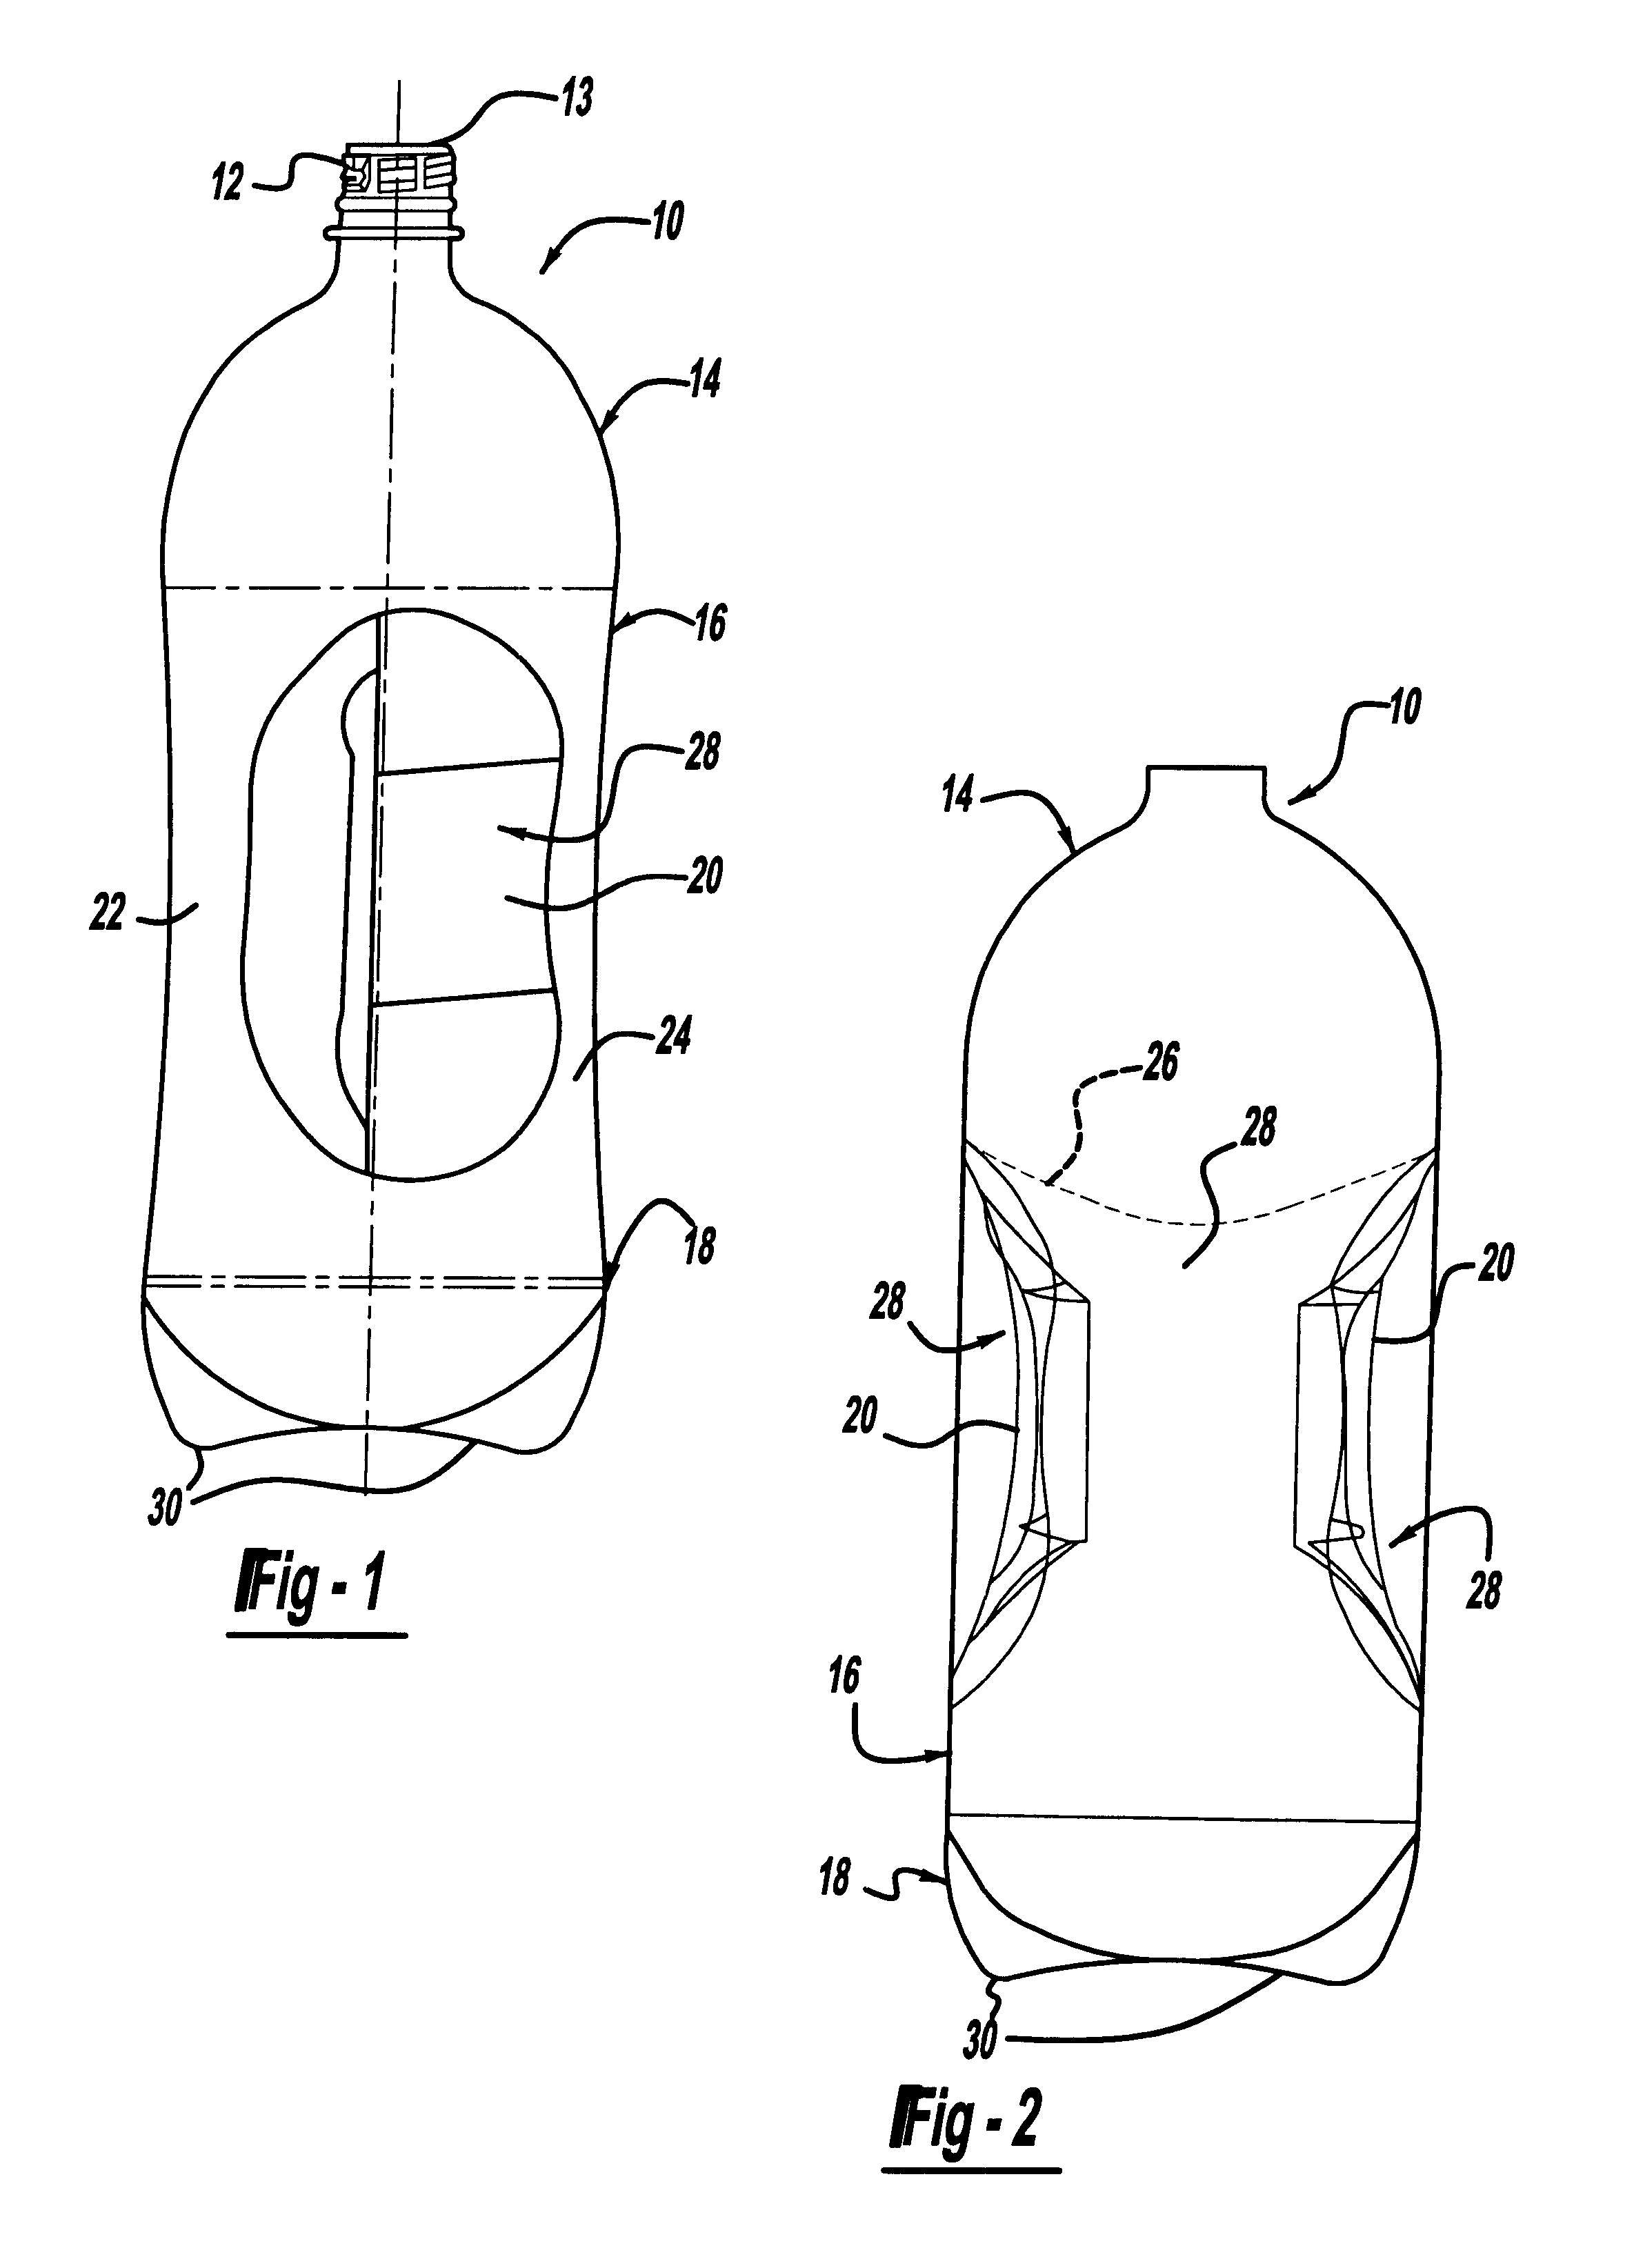 Non-rocking, webbed container for carbonated beverages